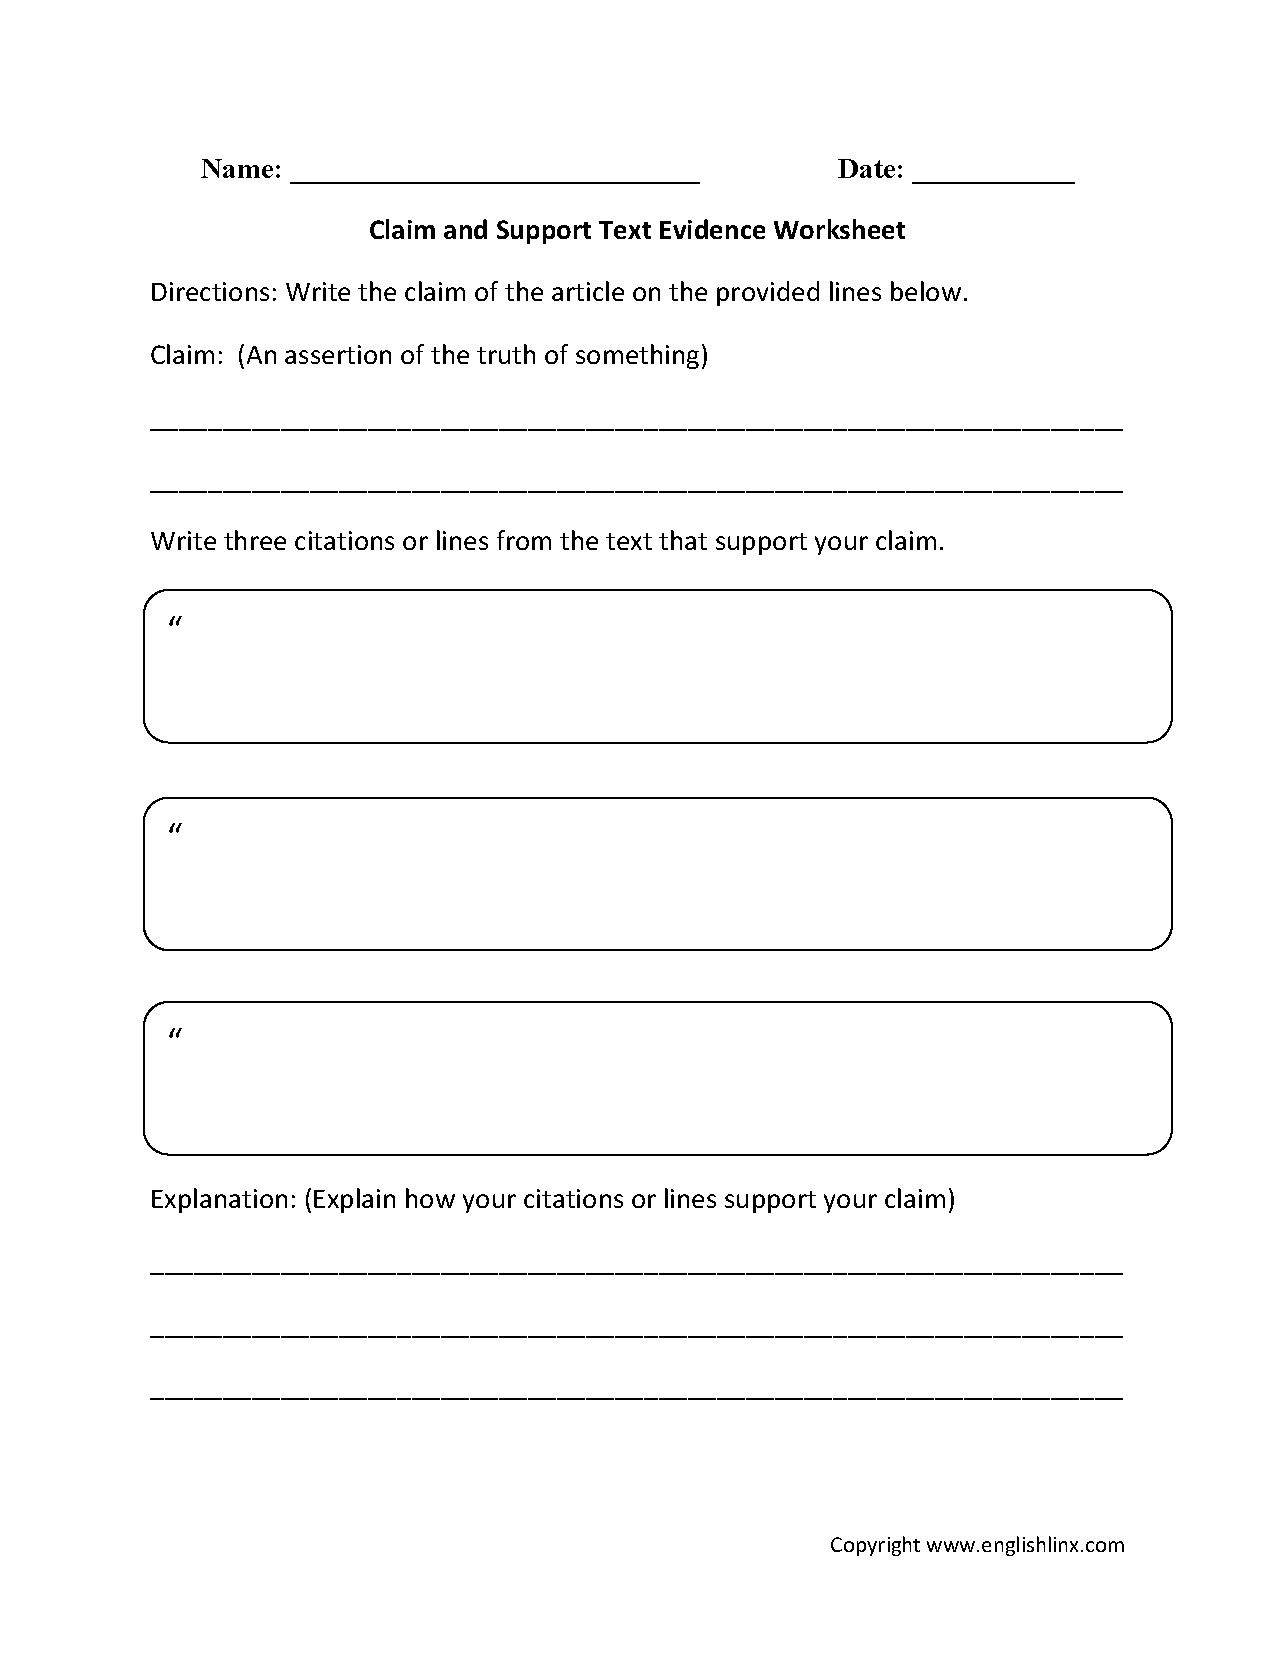 Citing Textual Evidence Worksheet 6Th Grade db excel com